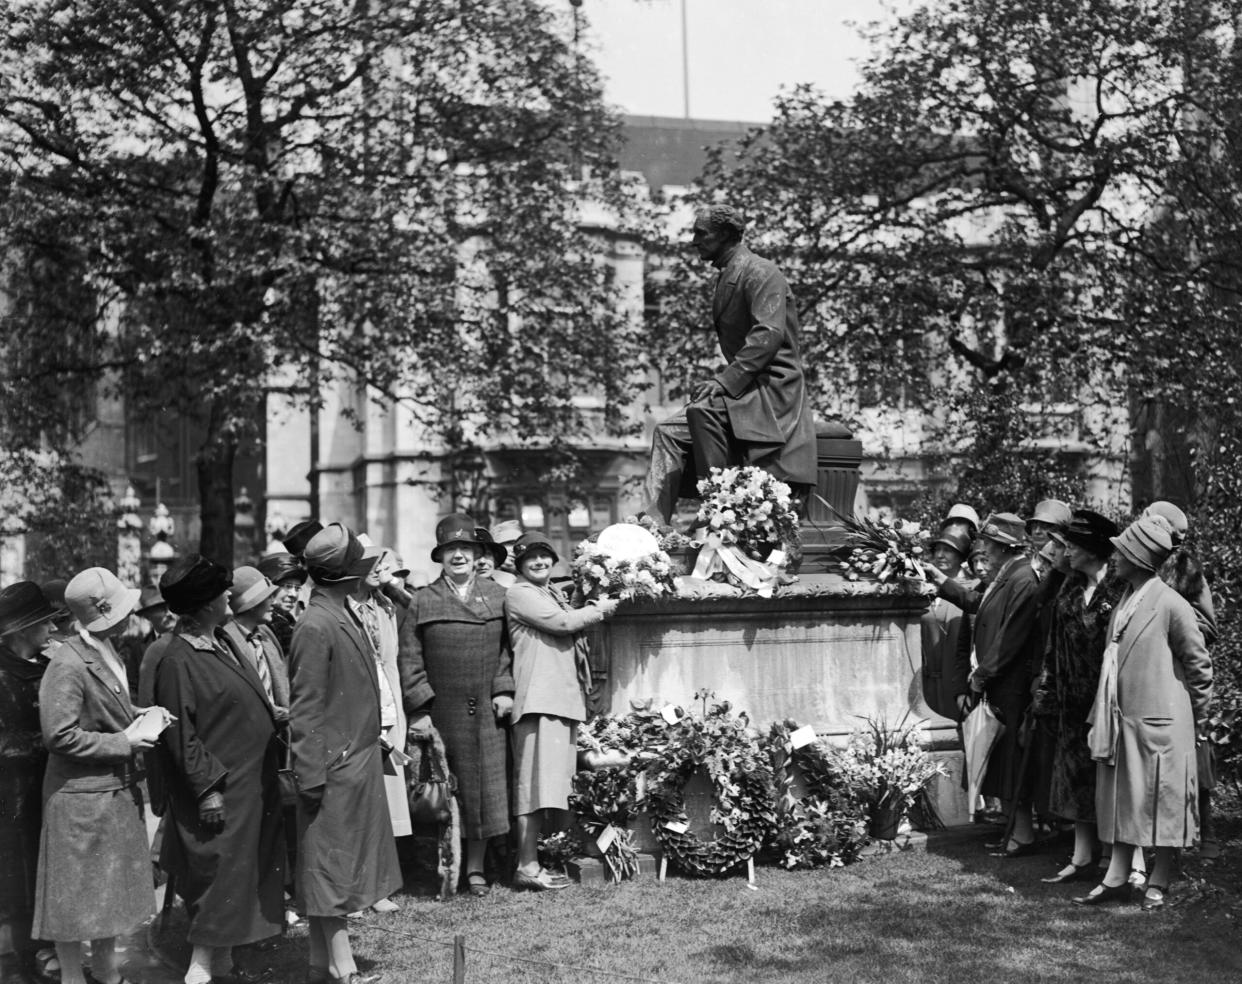 Representatives of the Women’s Freedom League make a 1928 pilgrimage to the statue of English philosopher John Stuart Mill (1806 – 1873) at Temple Gardens, London. (Credit: London Express/Getty Images)